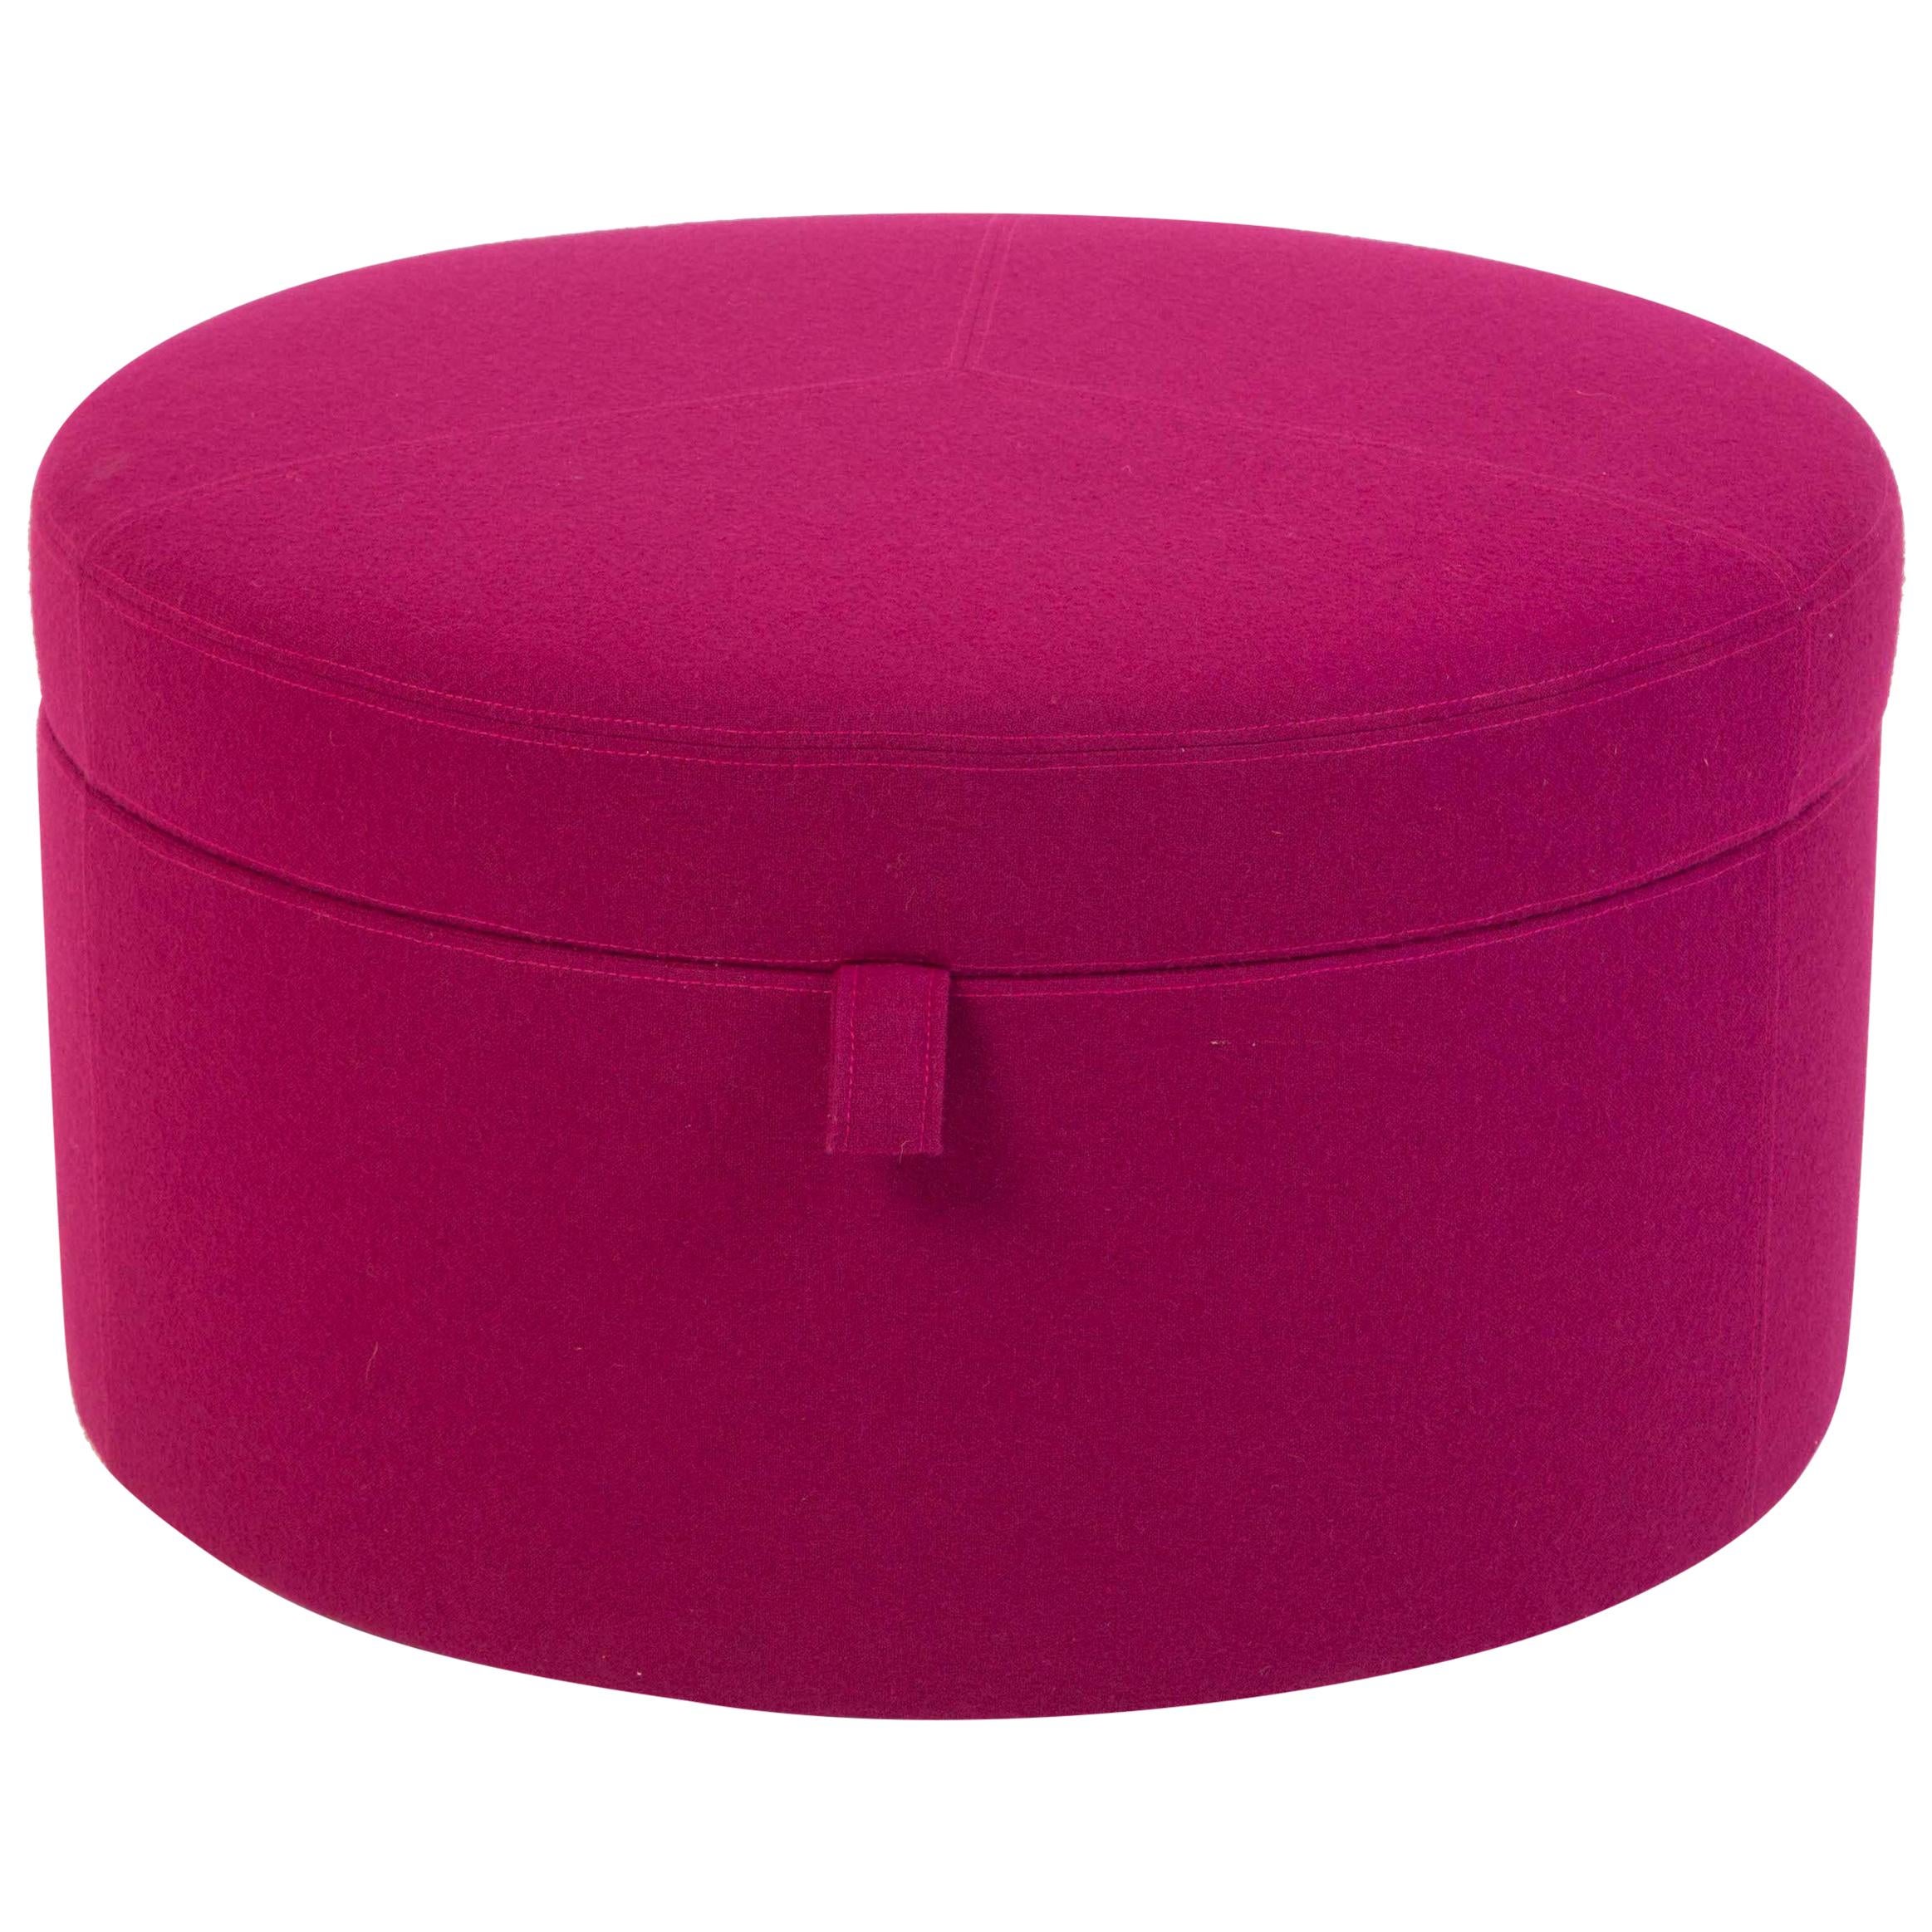 Radius Storage Ottoman-Pink, Round, Casters, Upholstered, Bedroom, Living room For Sale